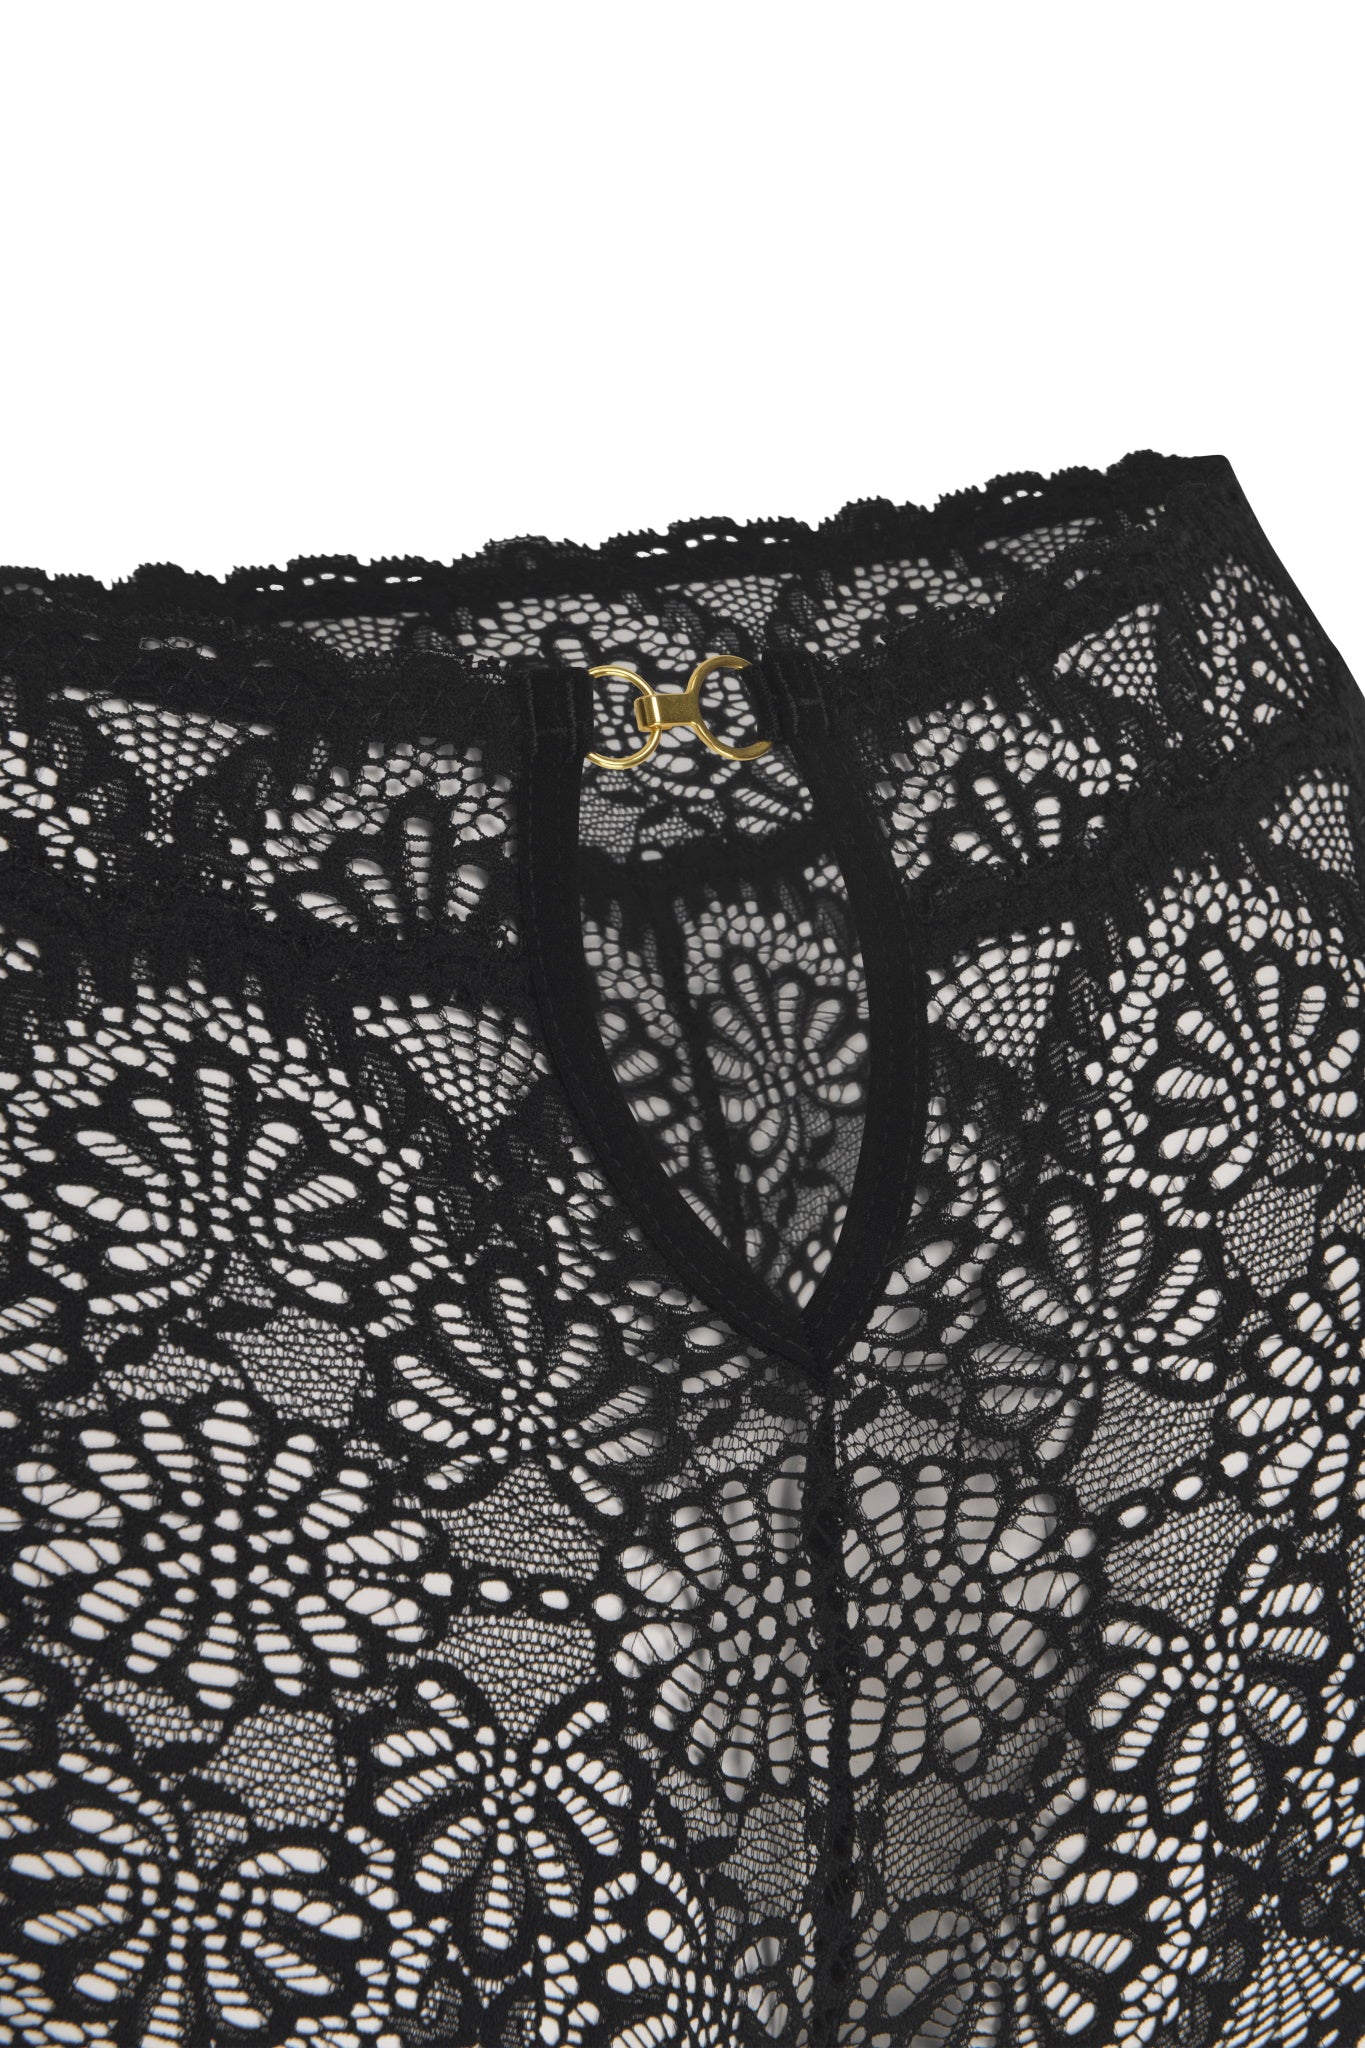 On The Inside - 'Sugarberry' Black French Lace Panties with Satin Ribbons